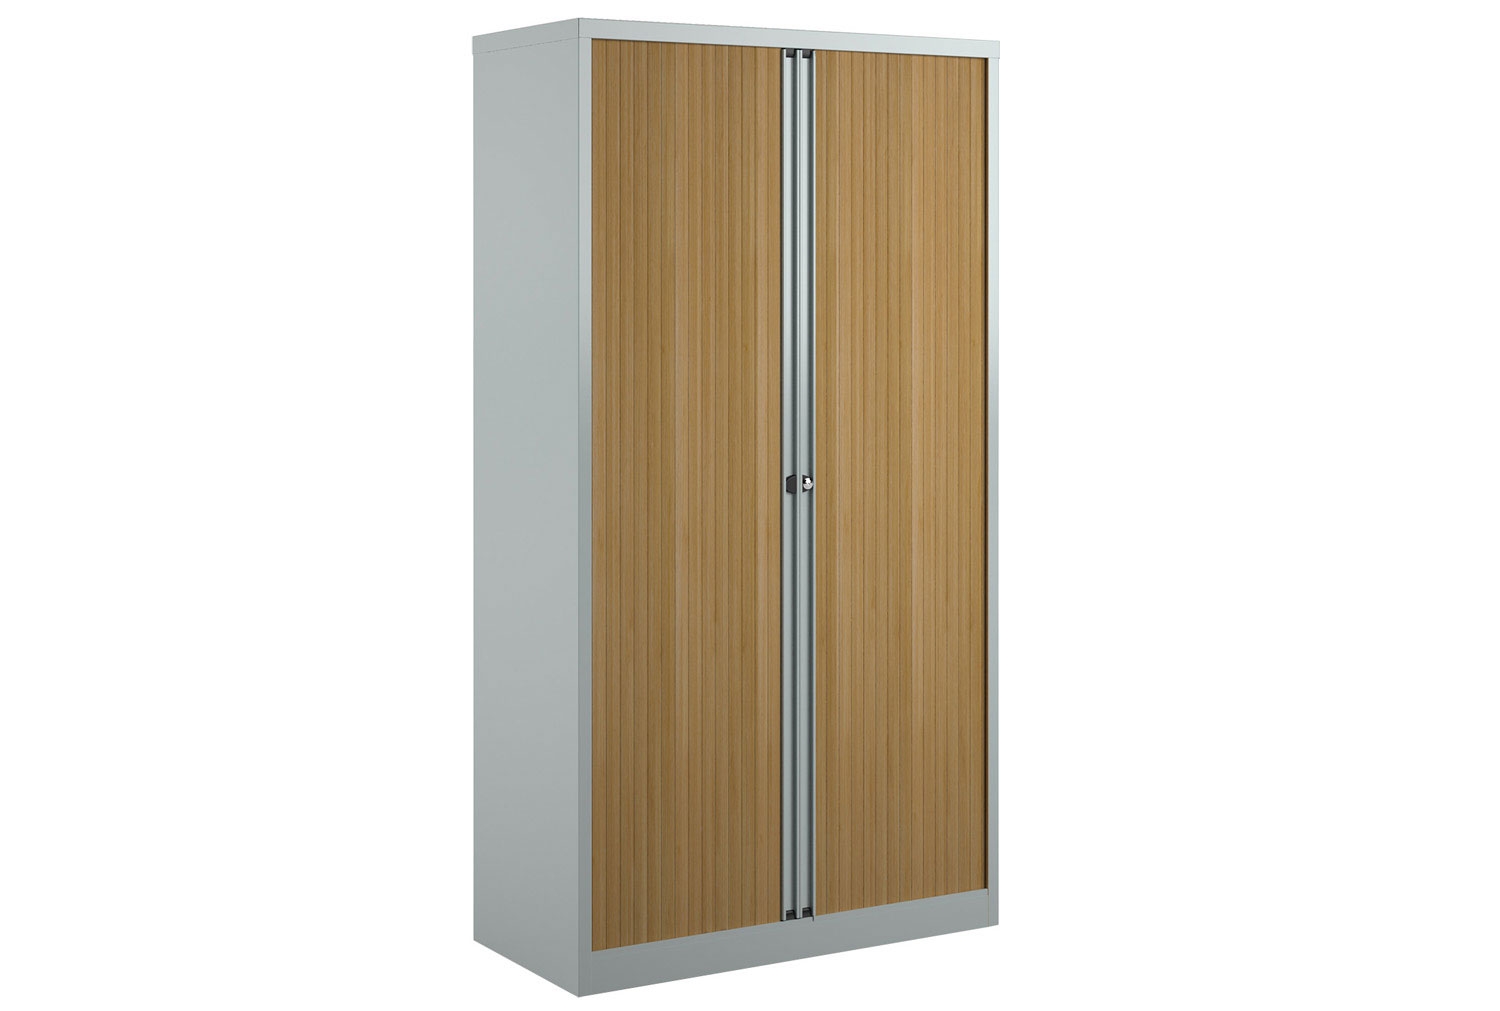 Bisley Economy Tambour Office Cupboards, 100wx47dx199h (cm), Silver / Beech, Fully Installed